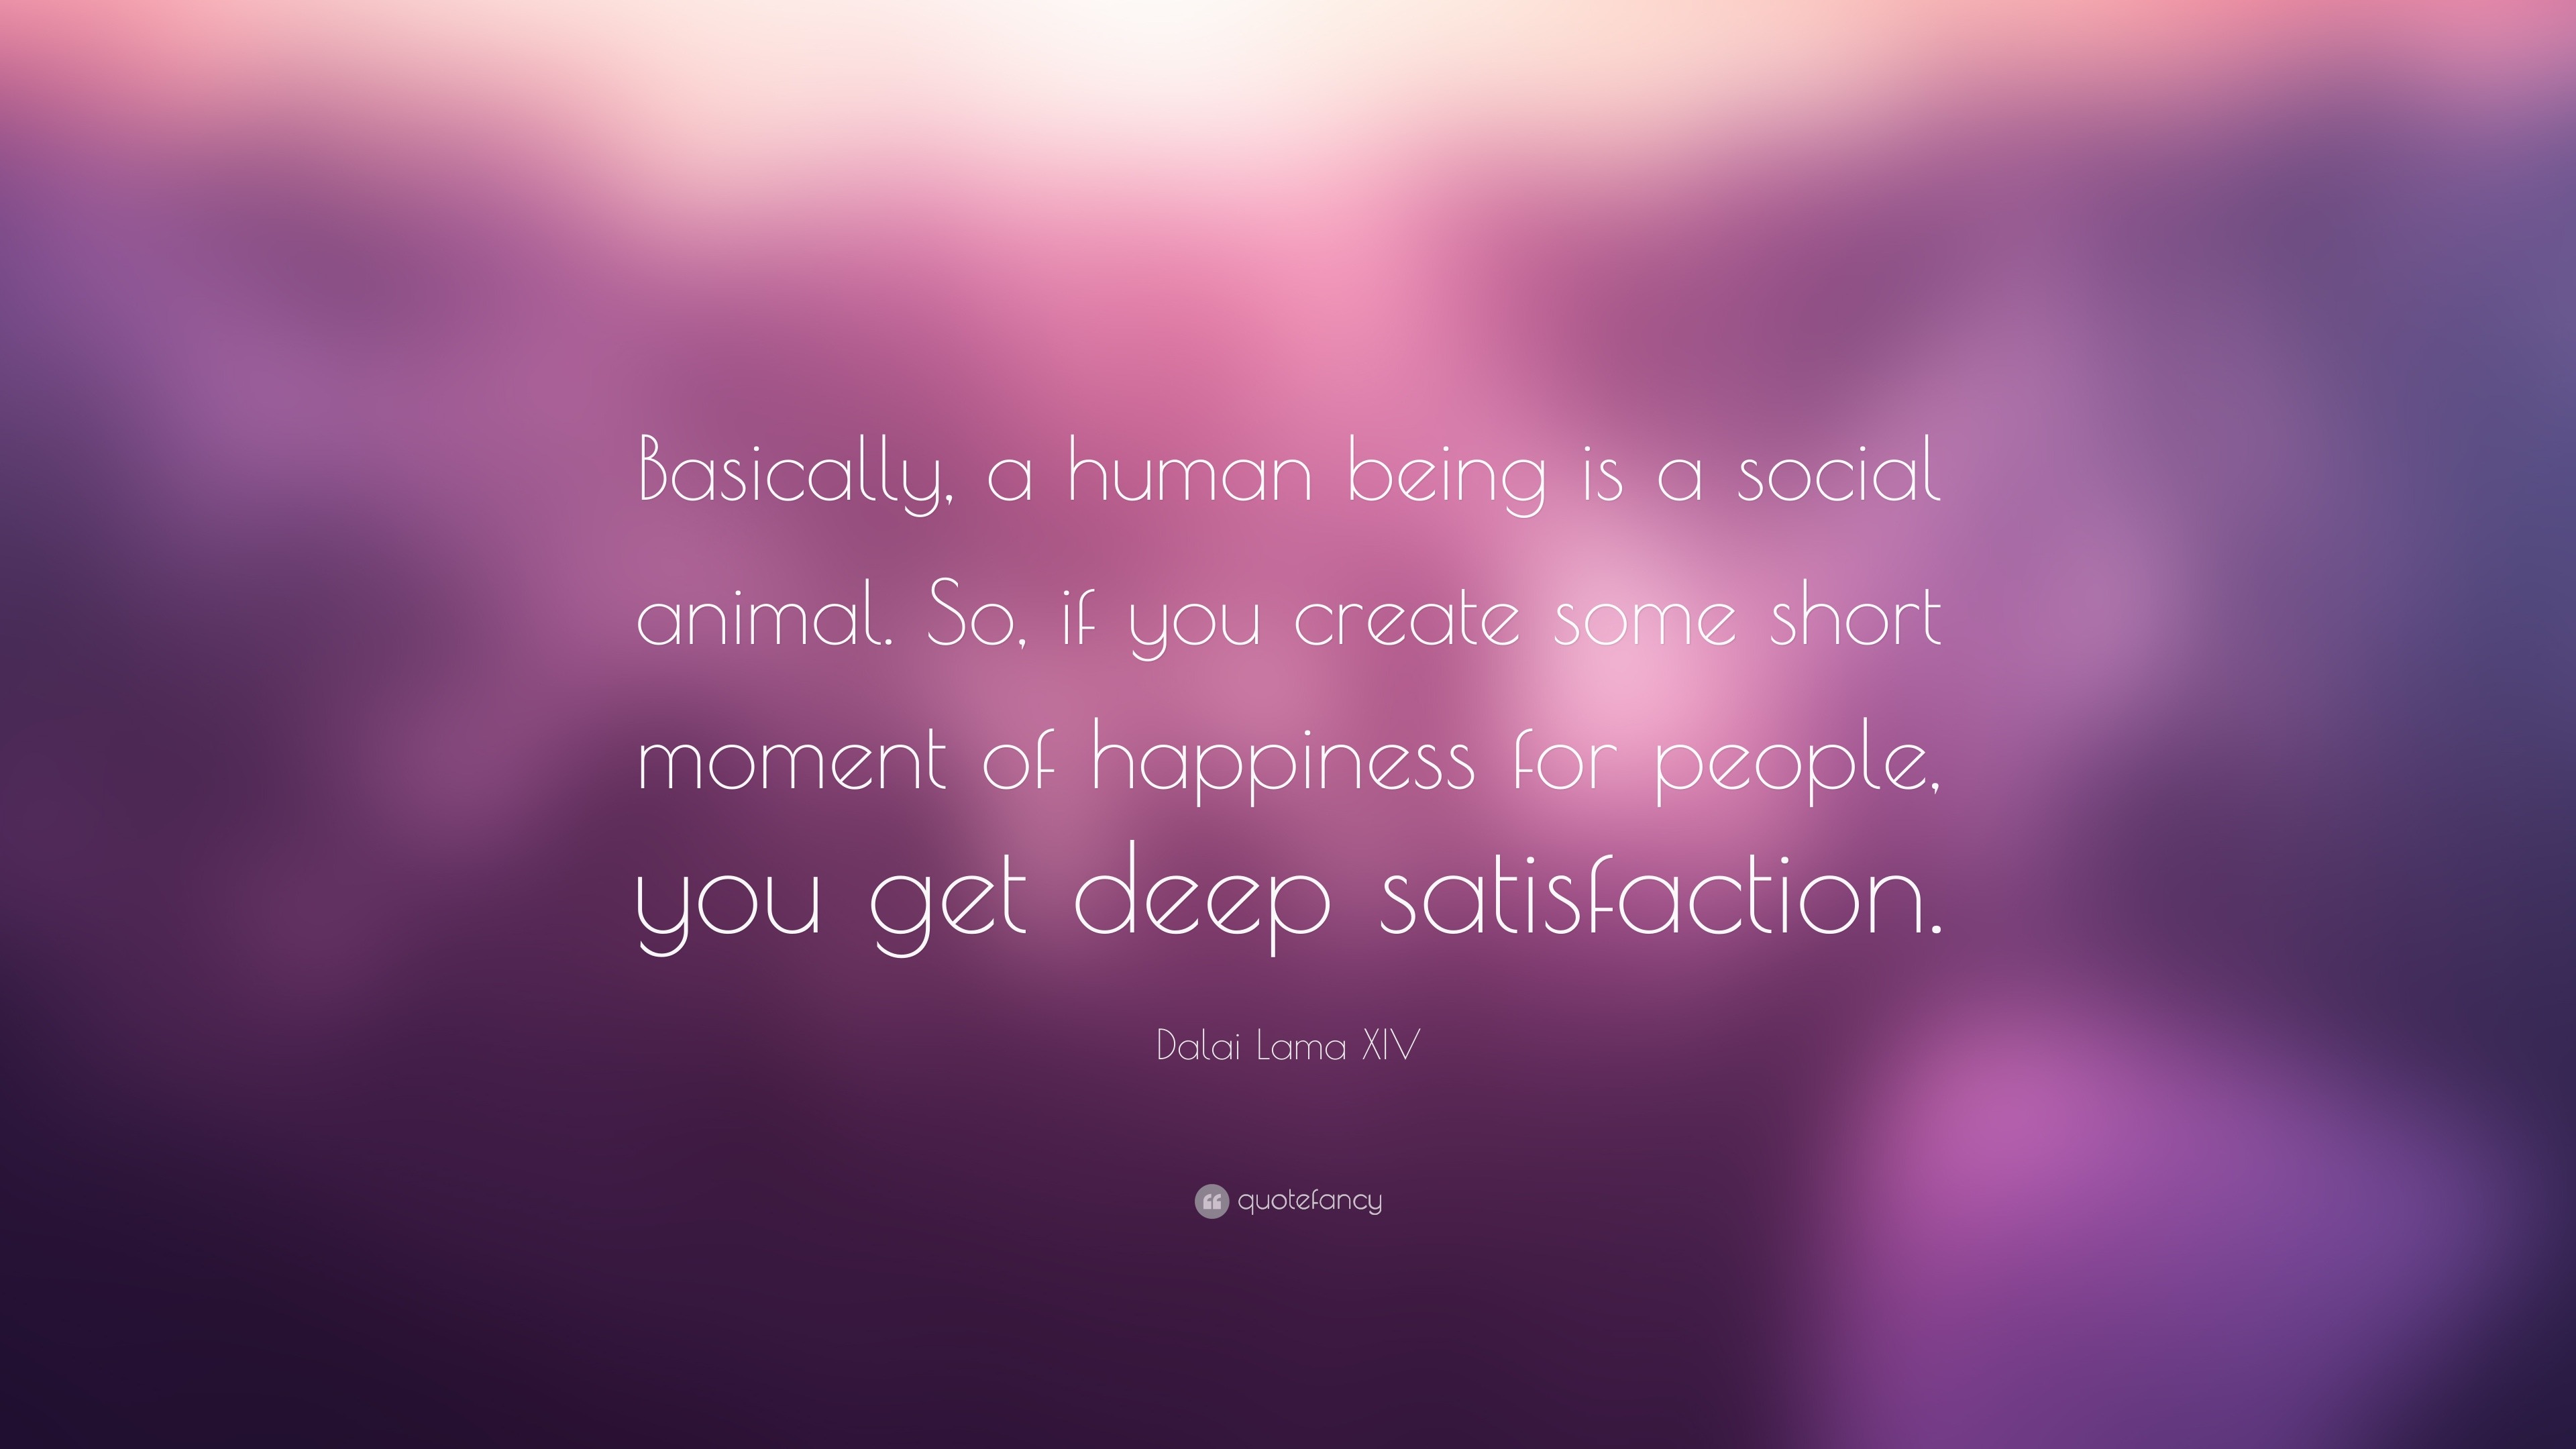 Dalai Lama XIV Quote: “Basically, a human being is a social animal. So, if  you create some short moment of happiness for people, you get deep s...”